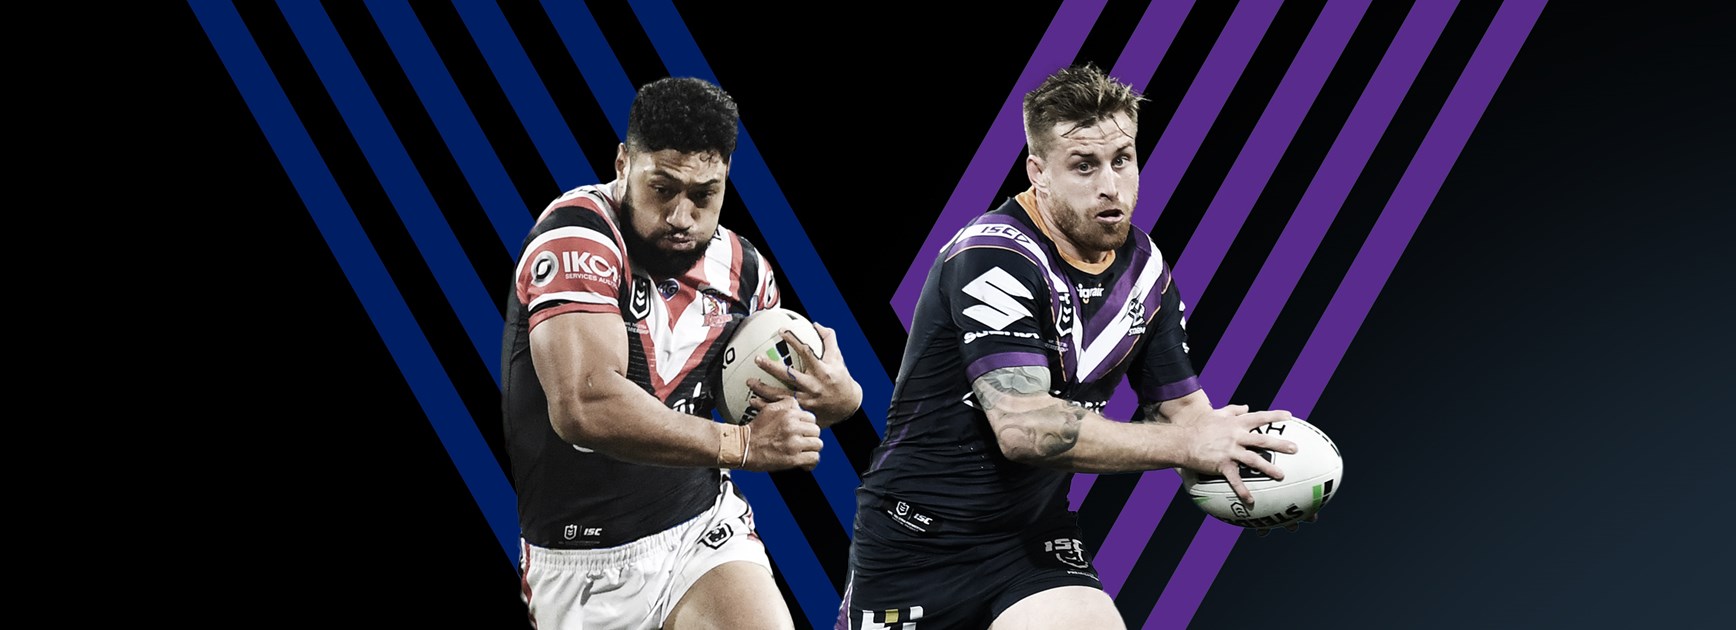 Roosters v Storm: Friend ruled out; Chambers gets reprieve